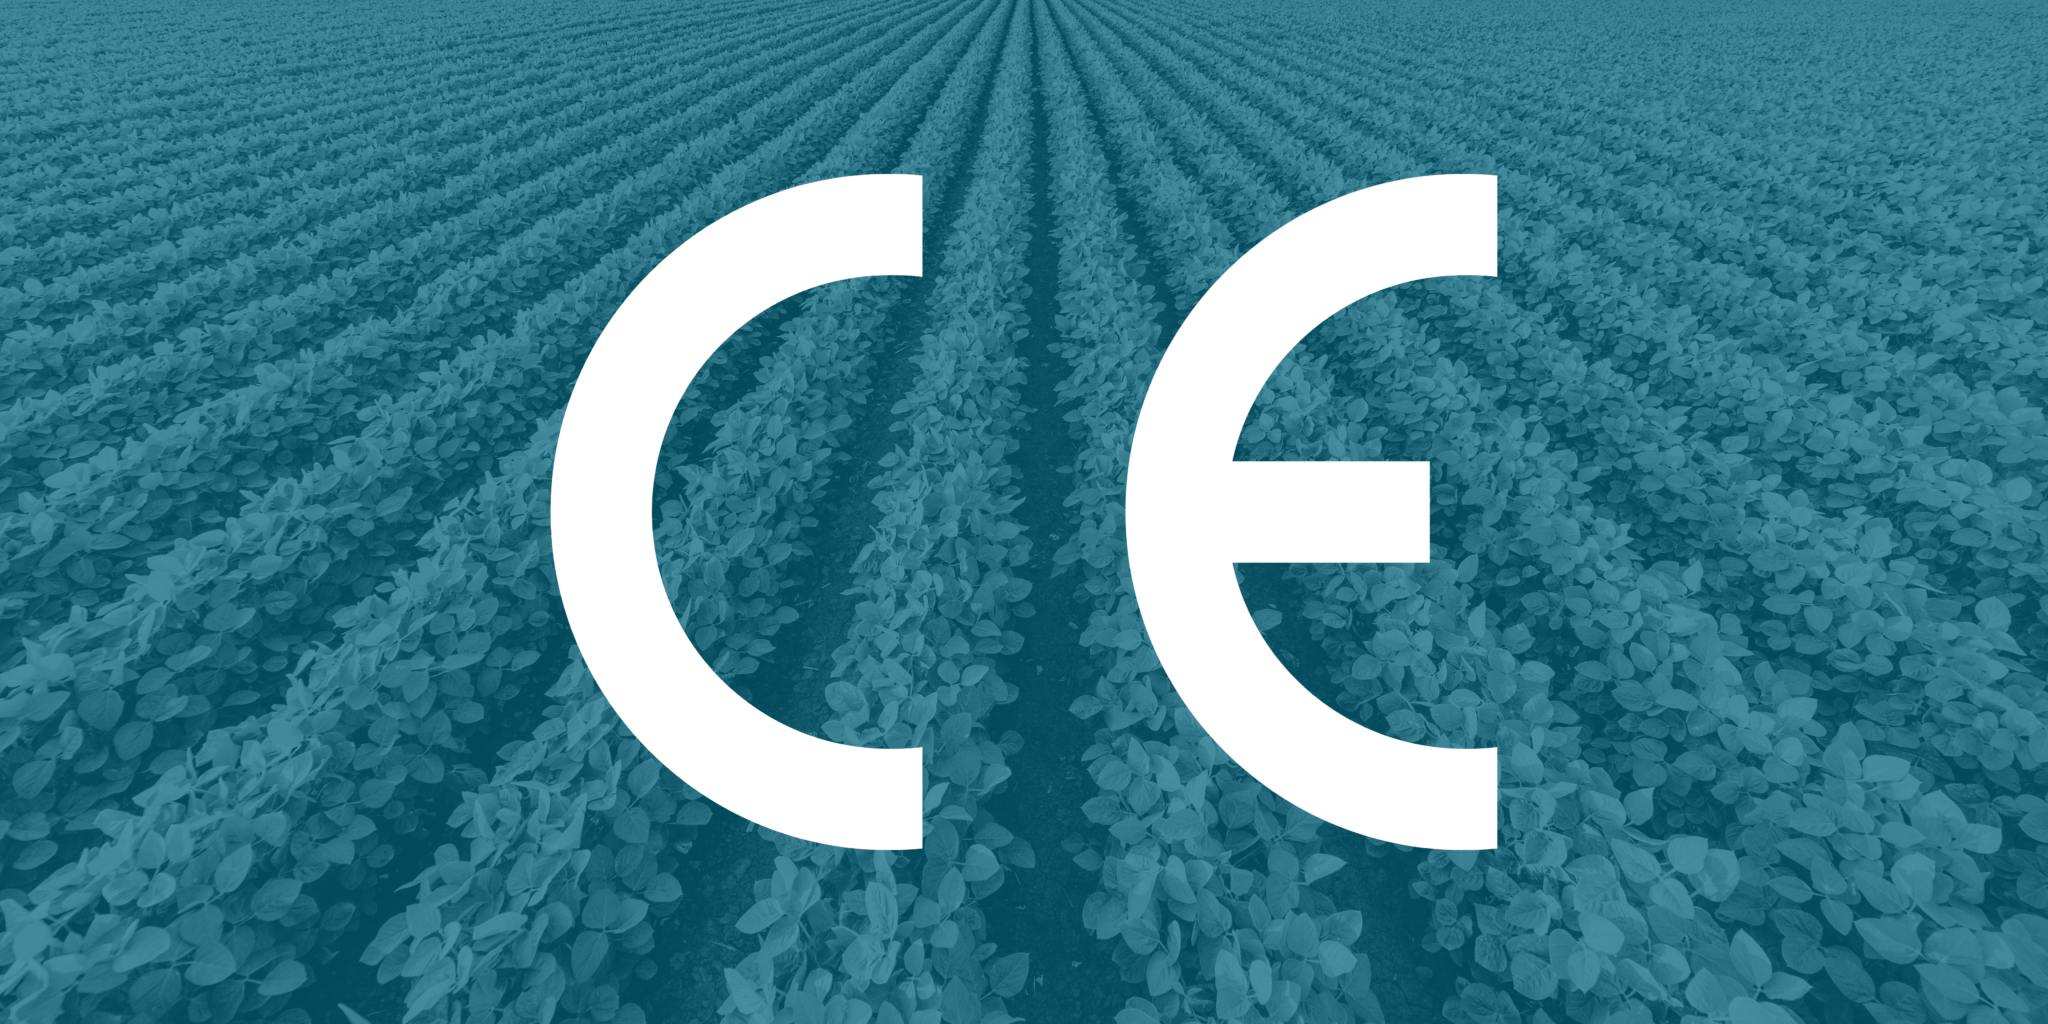 The logo of the EU Green Deal overlays a background of long potato field rows